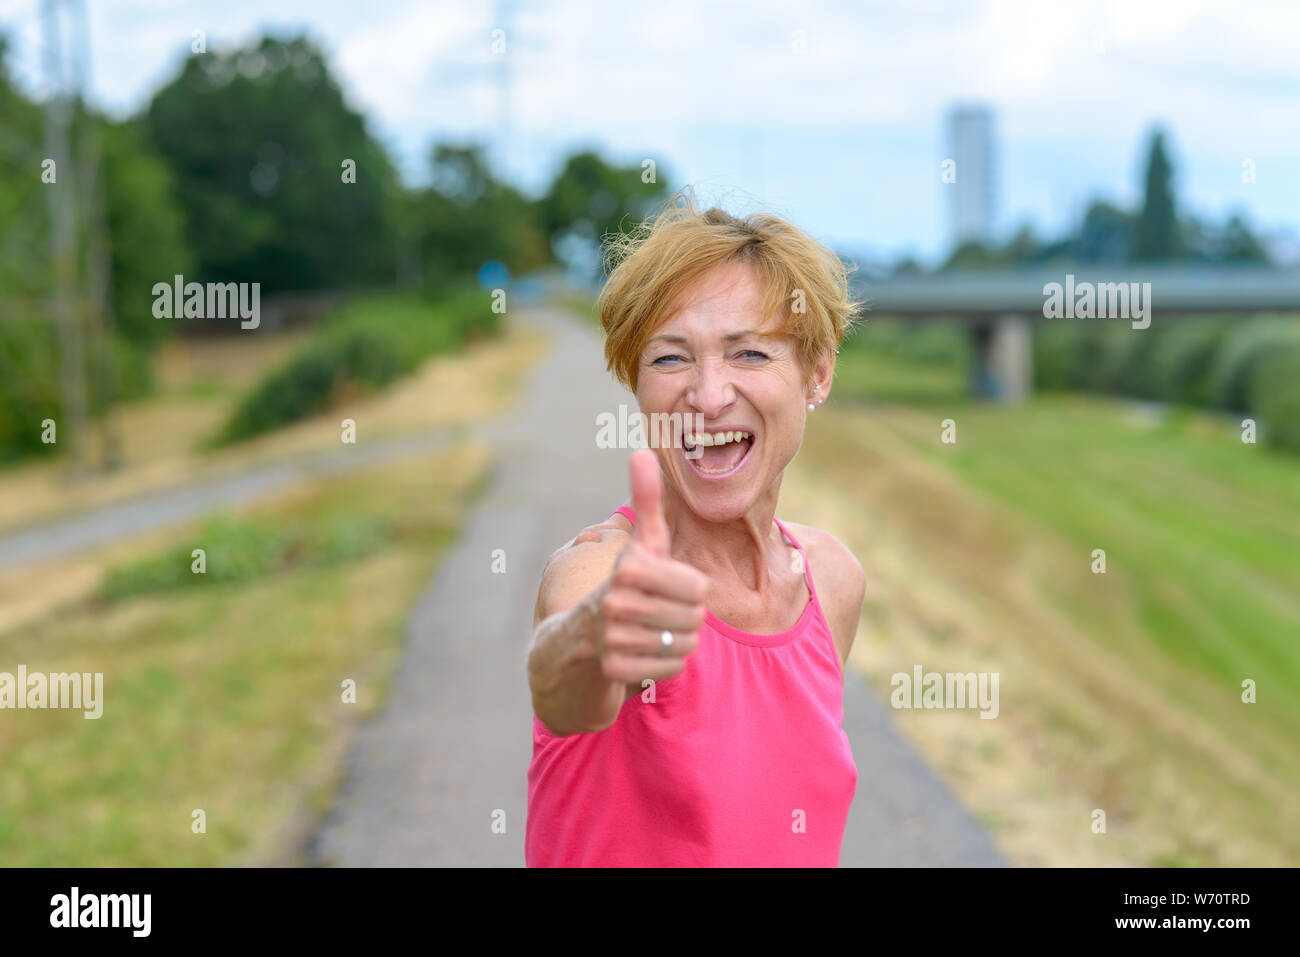 Enthusiastic woman giving a thumbs up gesture with a beaming gleeful smile as she celebrates a personal success or shows her support and agreement Stock Photo